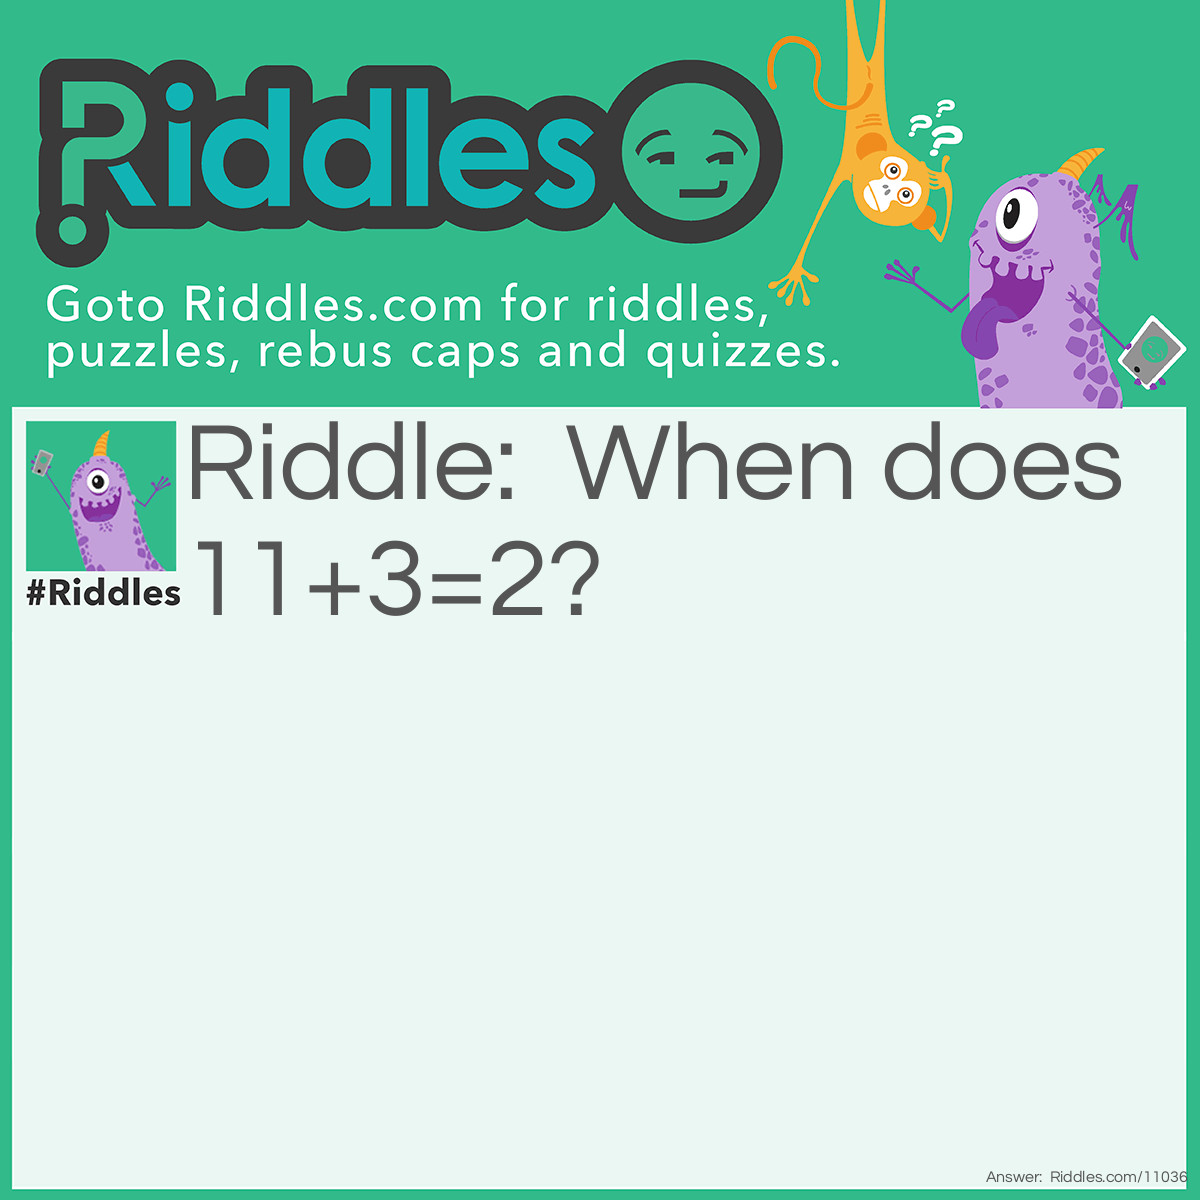 Riddle: When does 11+3=2? Answer: On a clock